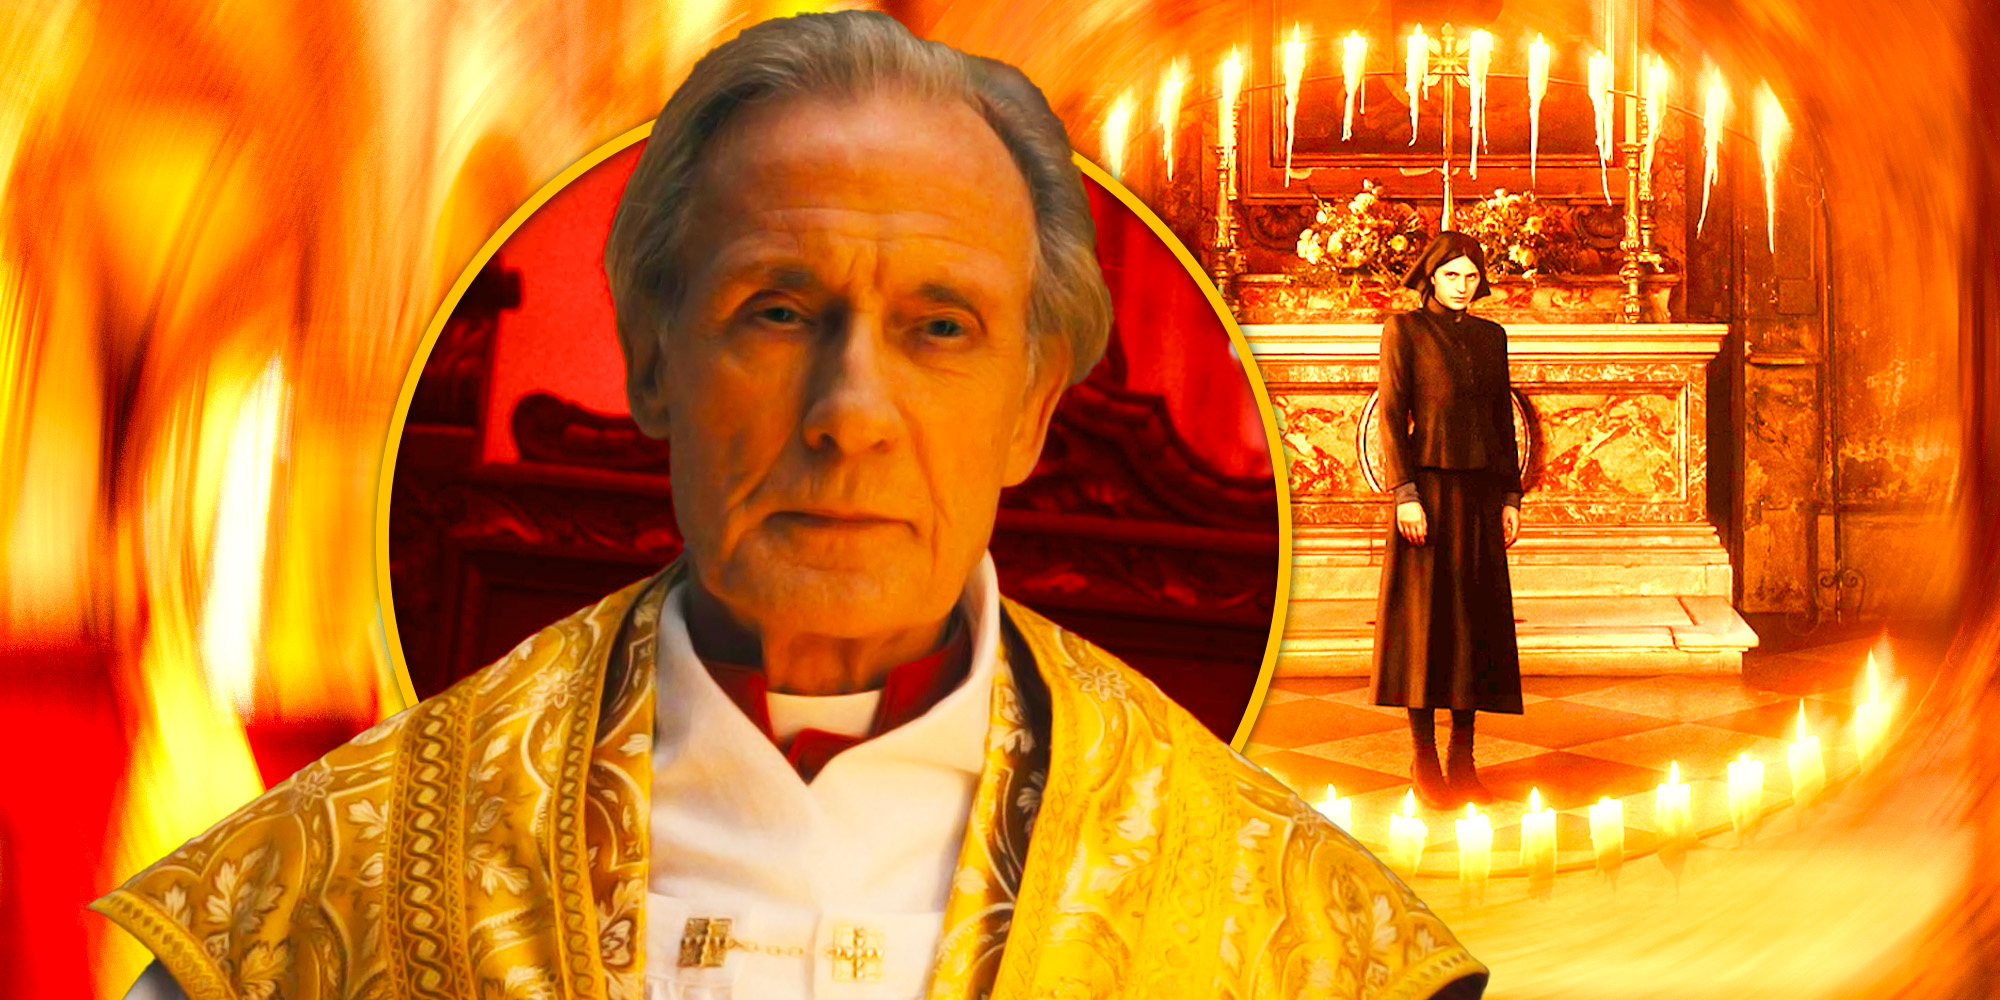 Bill Nighy in priest garb & Nell Tiger Free in nun outfit for The First Omen